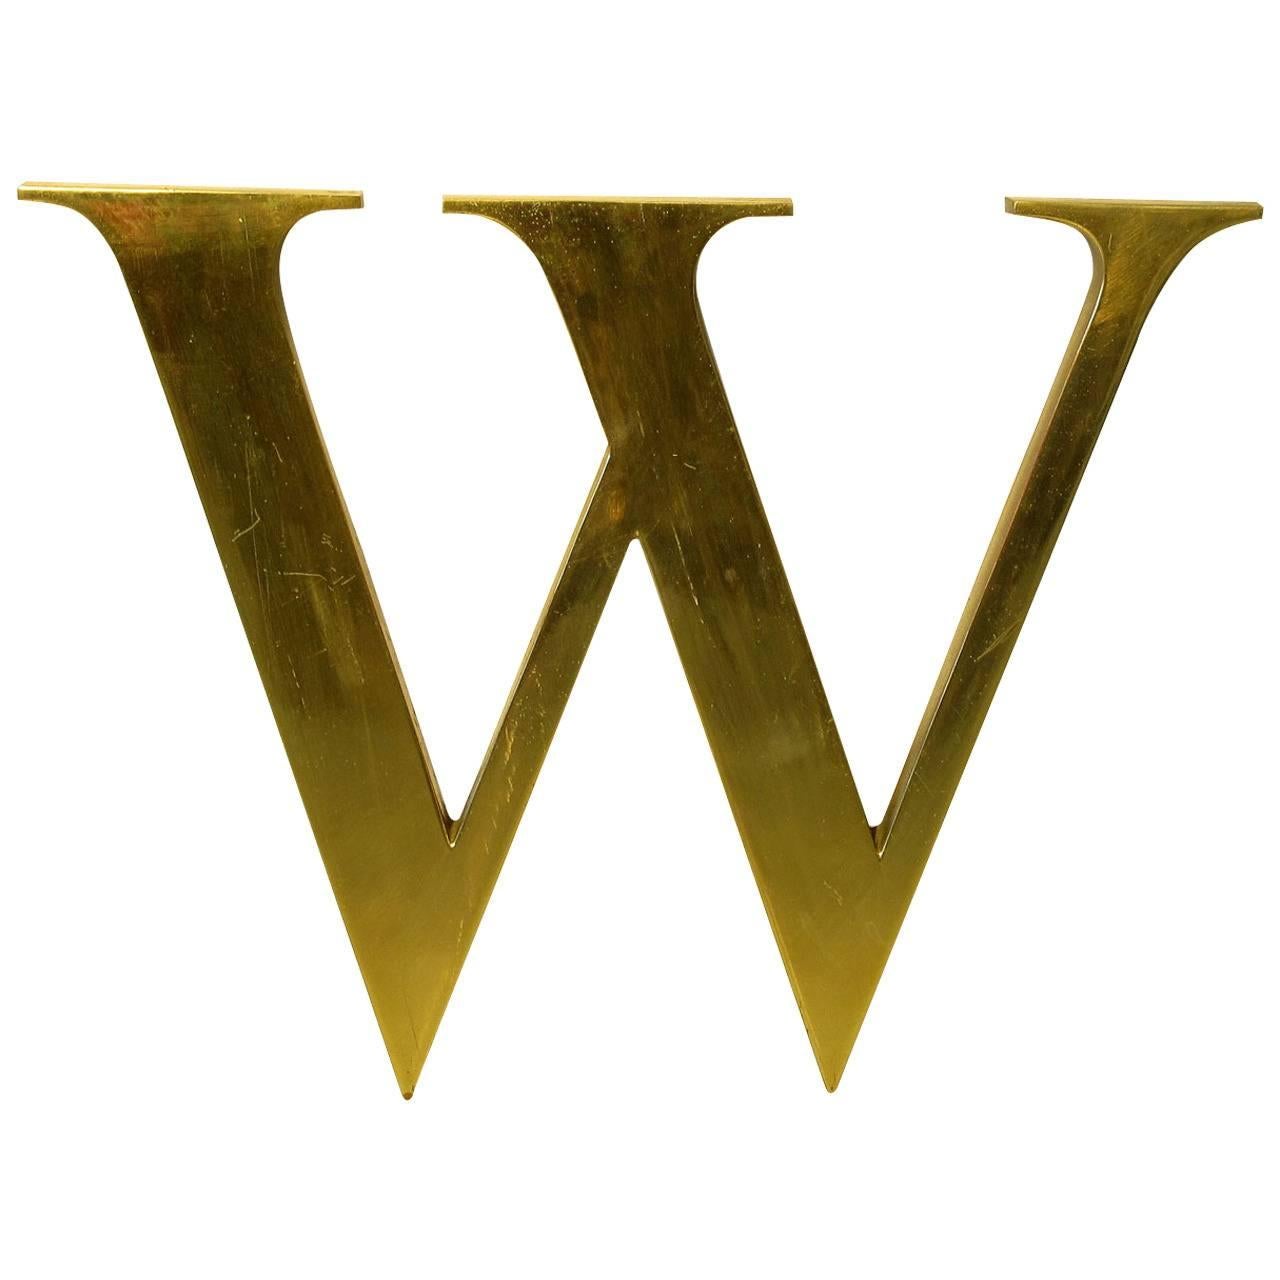 Solid Brass Letter "W" For Sale